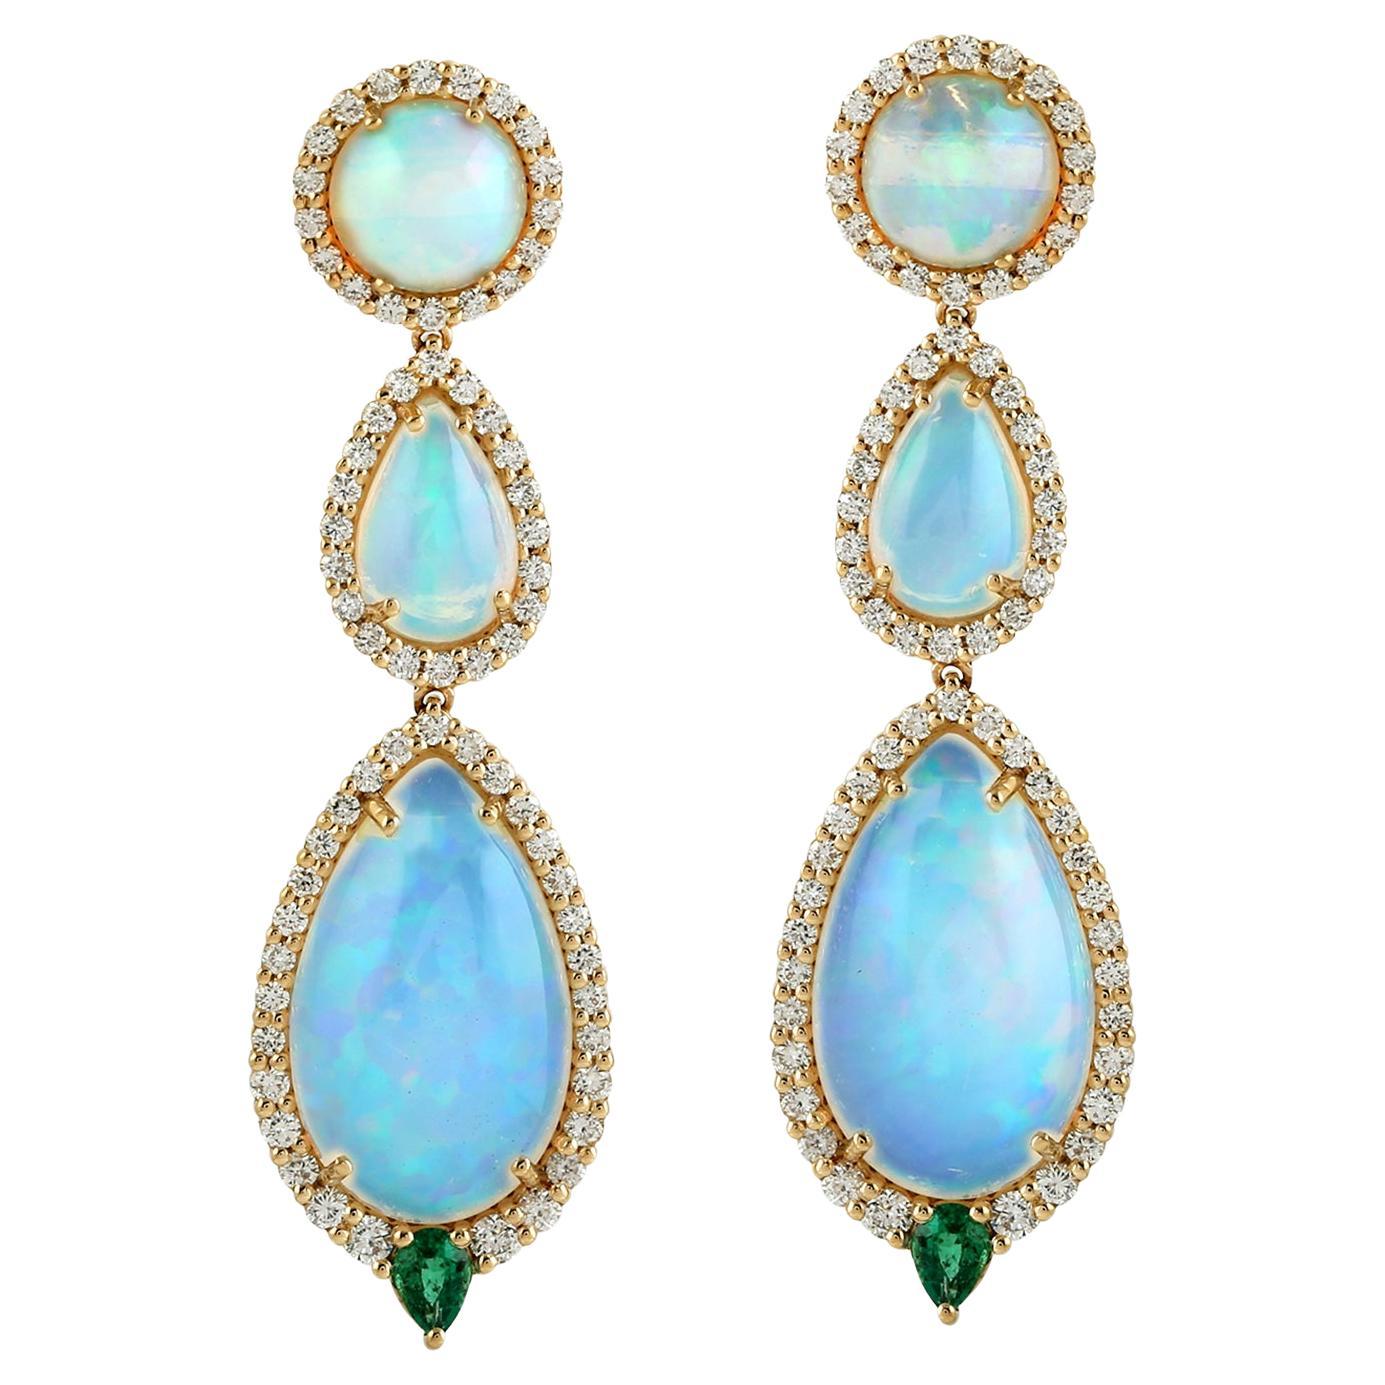 3 Tier Ethiopian Opal Dangle Earrings With Emerald Made In 18k Yellow Gold For Sale